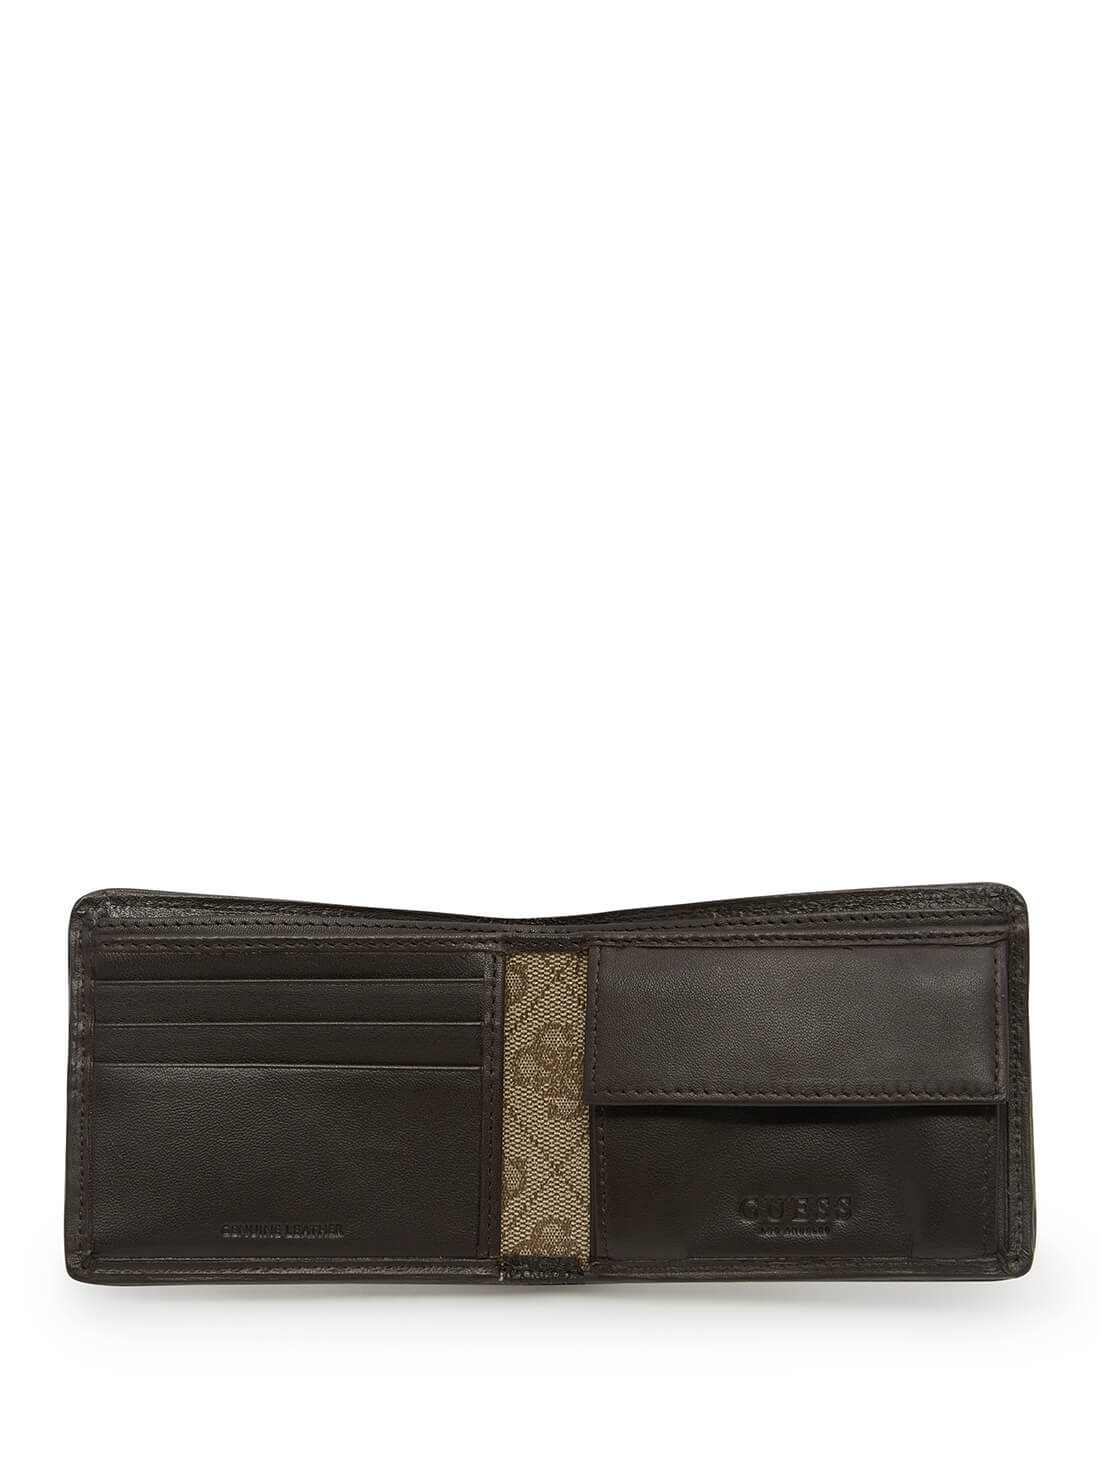 GUESS Men's Brown Quattro G Slimfold Wallet 31GUE13217 Inside View